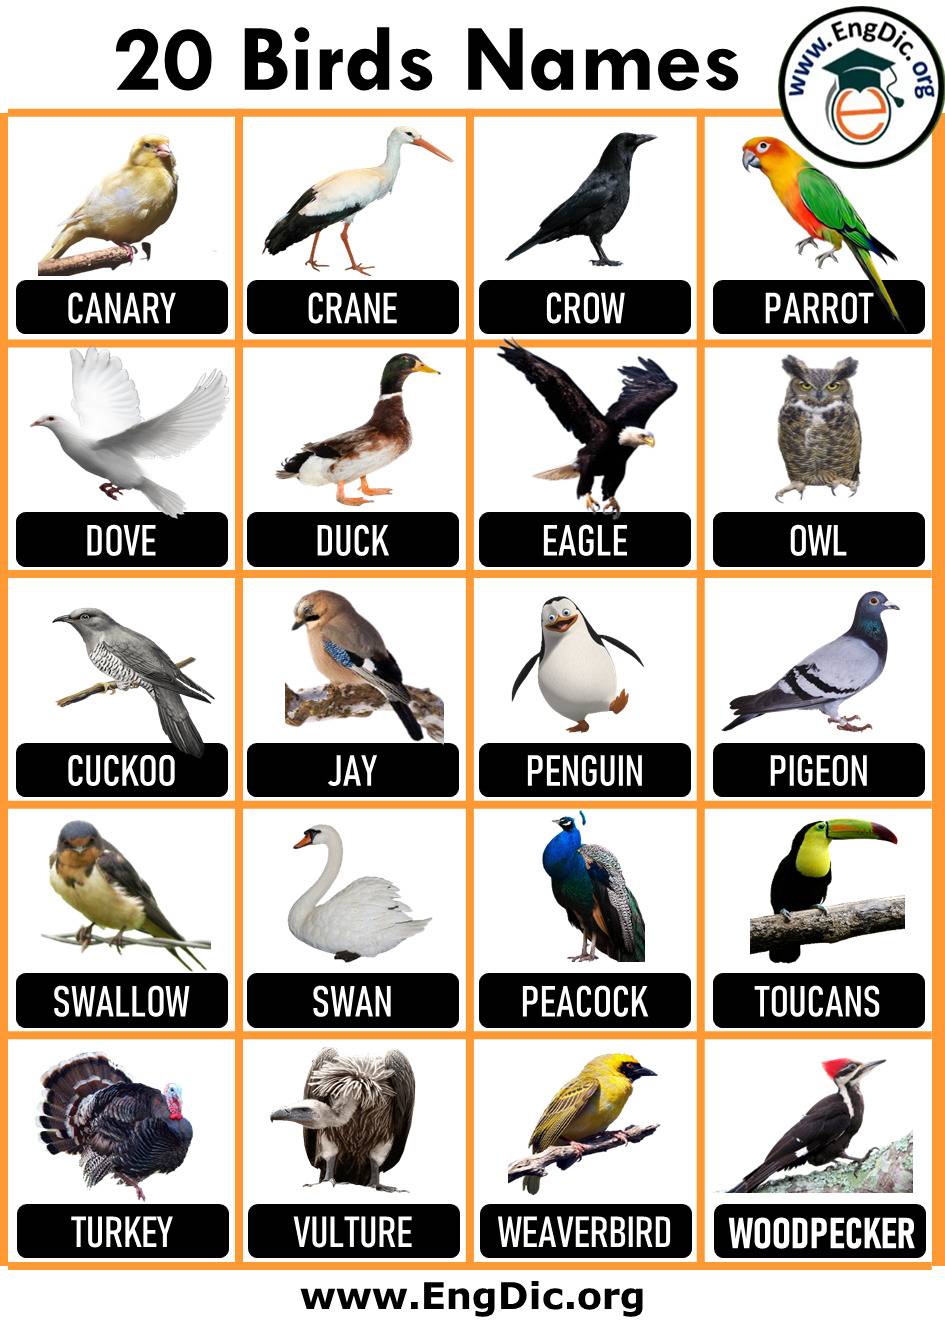 20 Birds Name, Birds Name List with Pictures PDF - EngDic